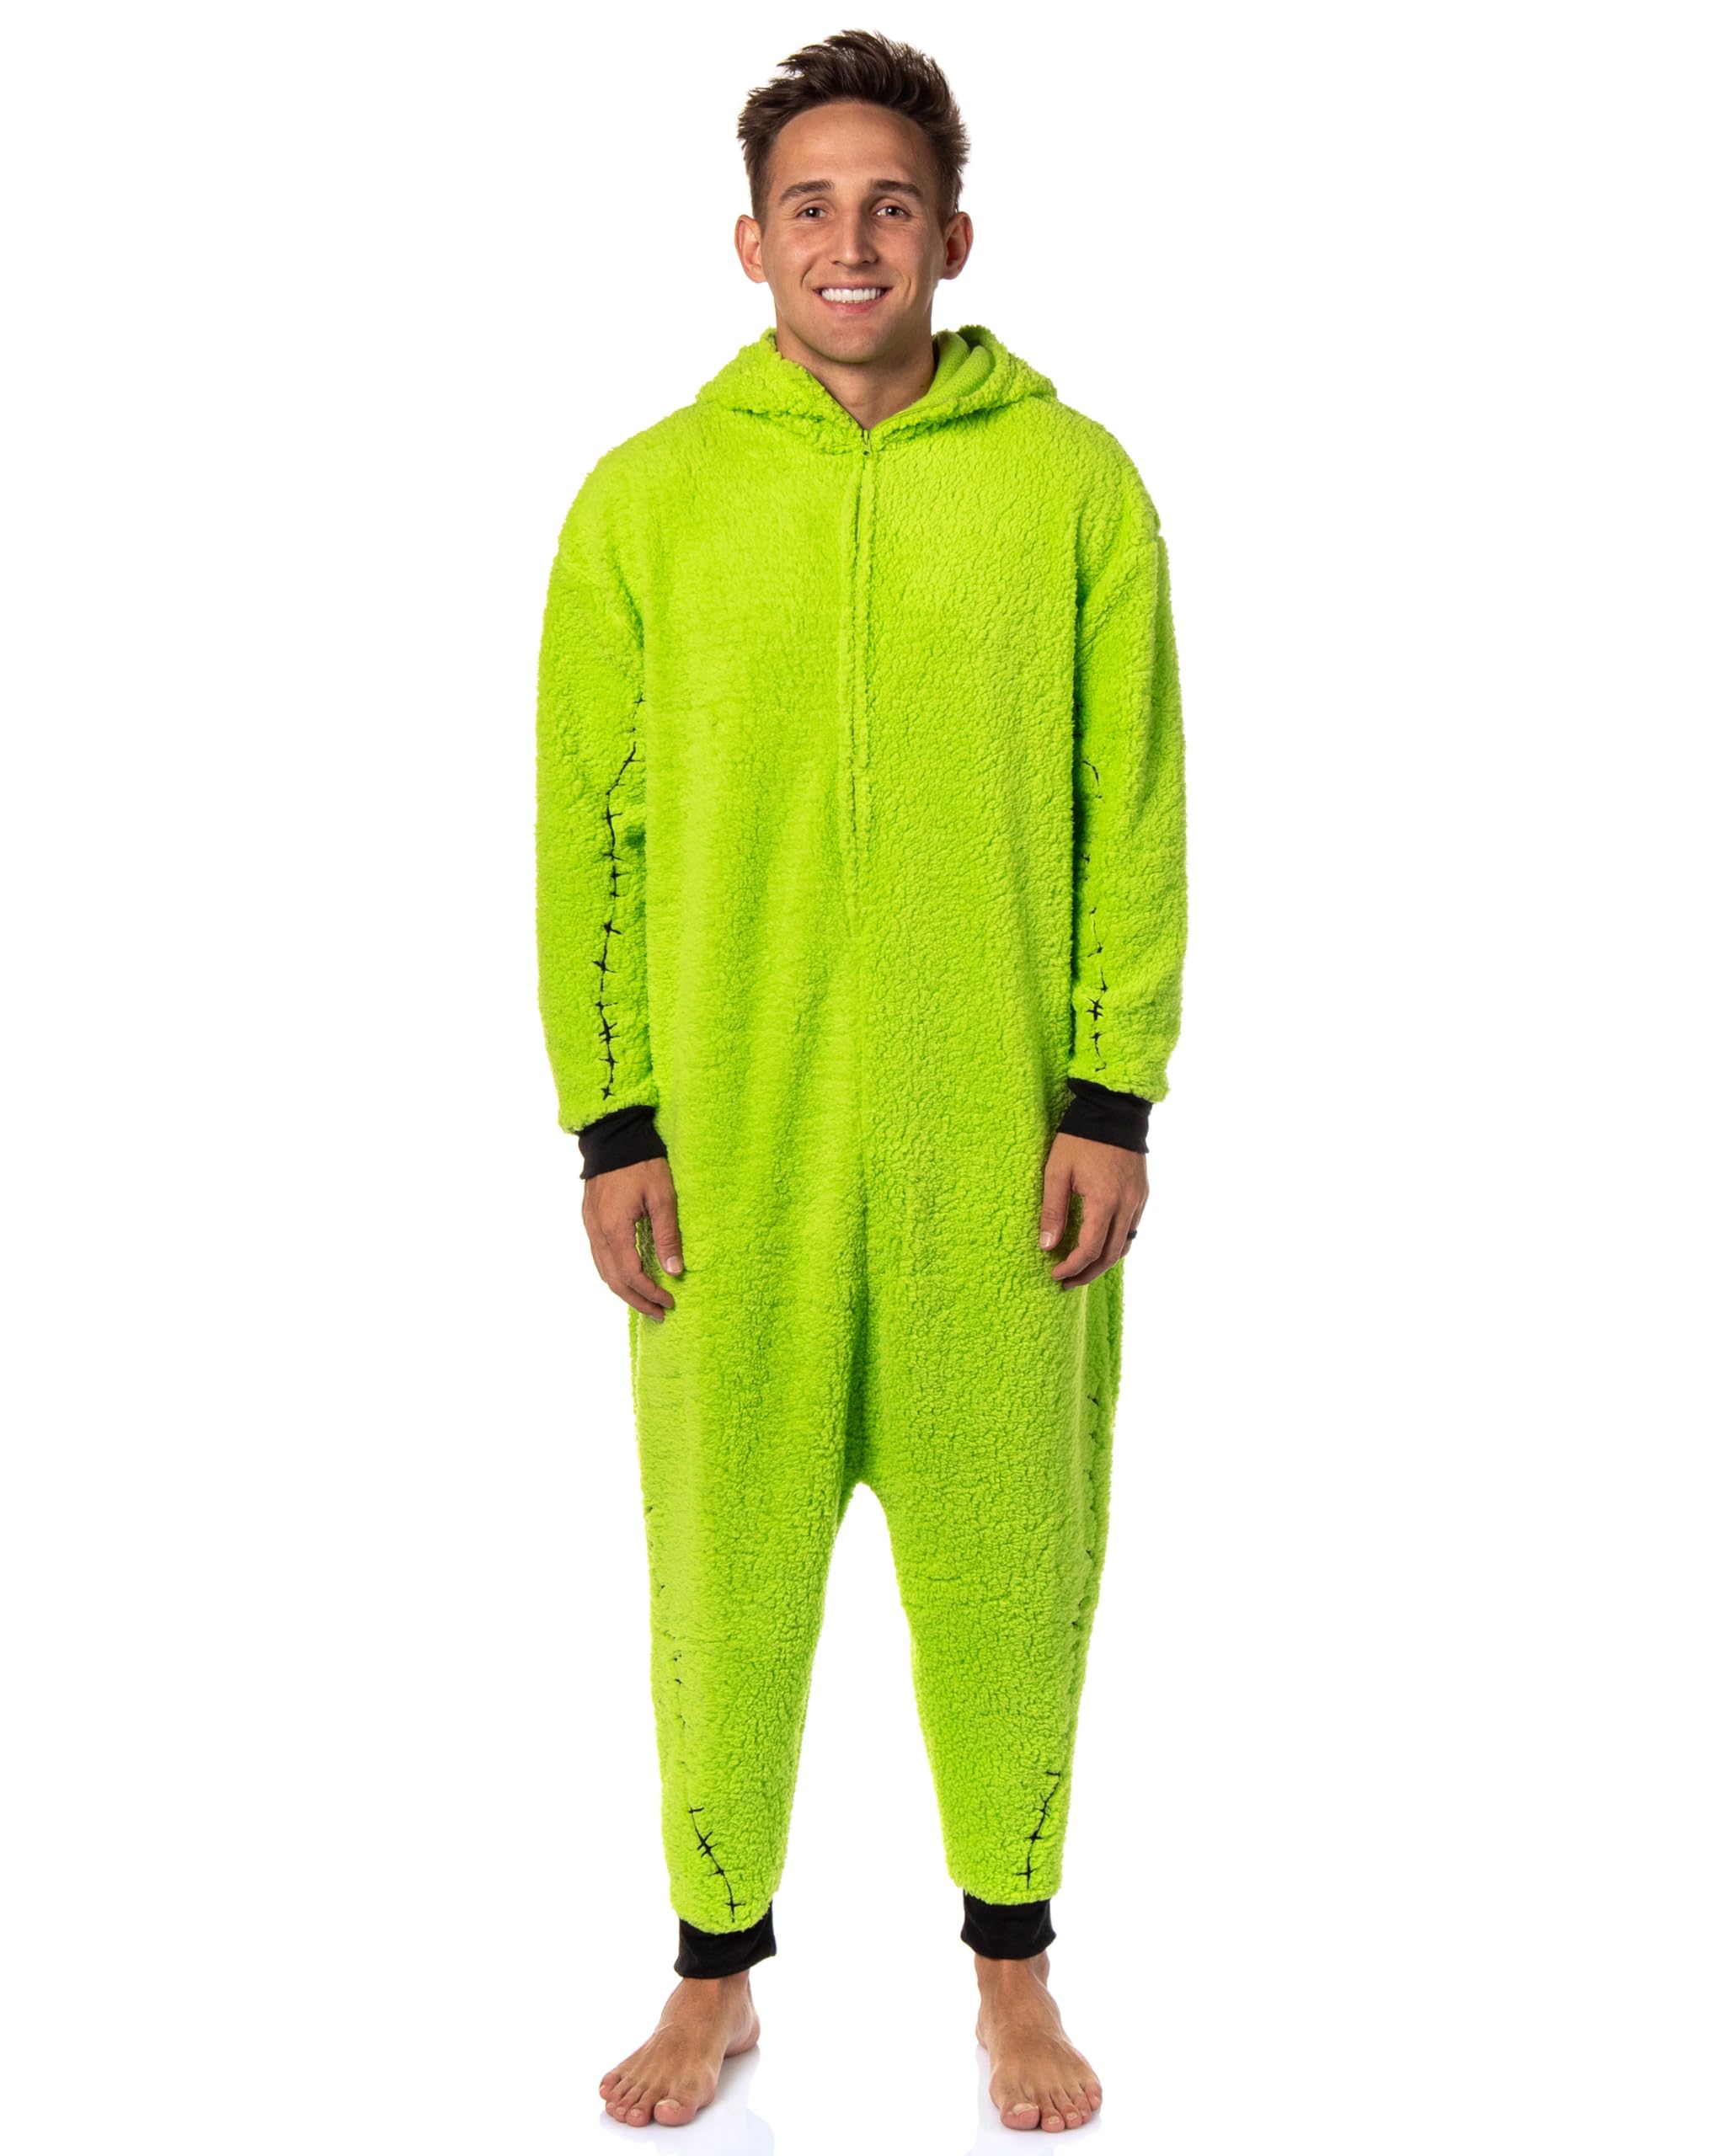 MJC International Group, LLC The Nightmare Before Christmas Oogie Boogie Costume Sherpa One Piece Pajama Union Suit (Small) Green